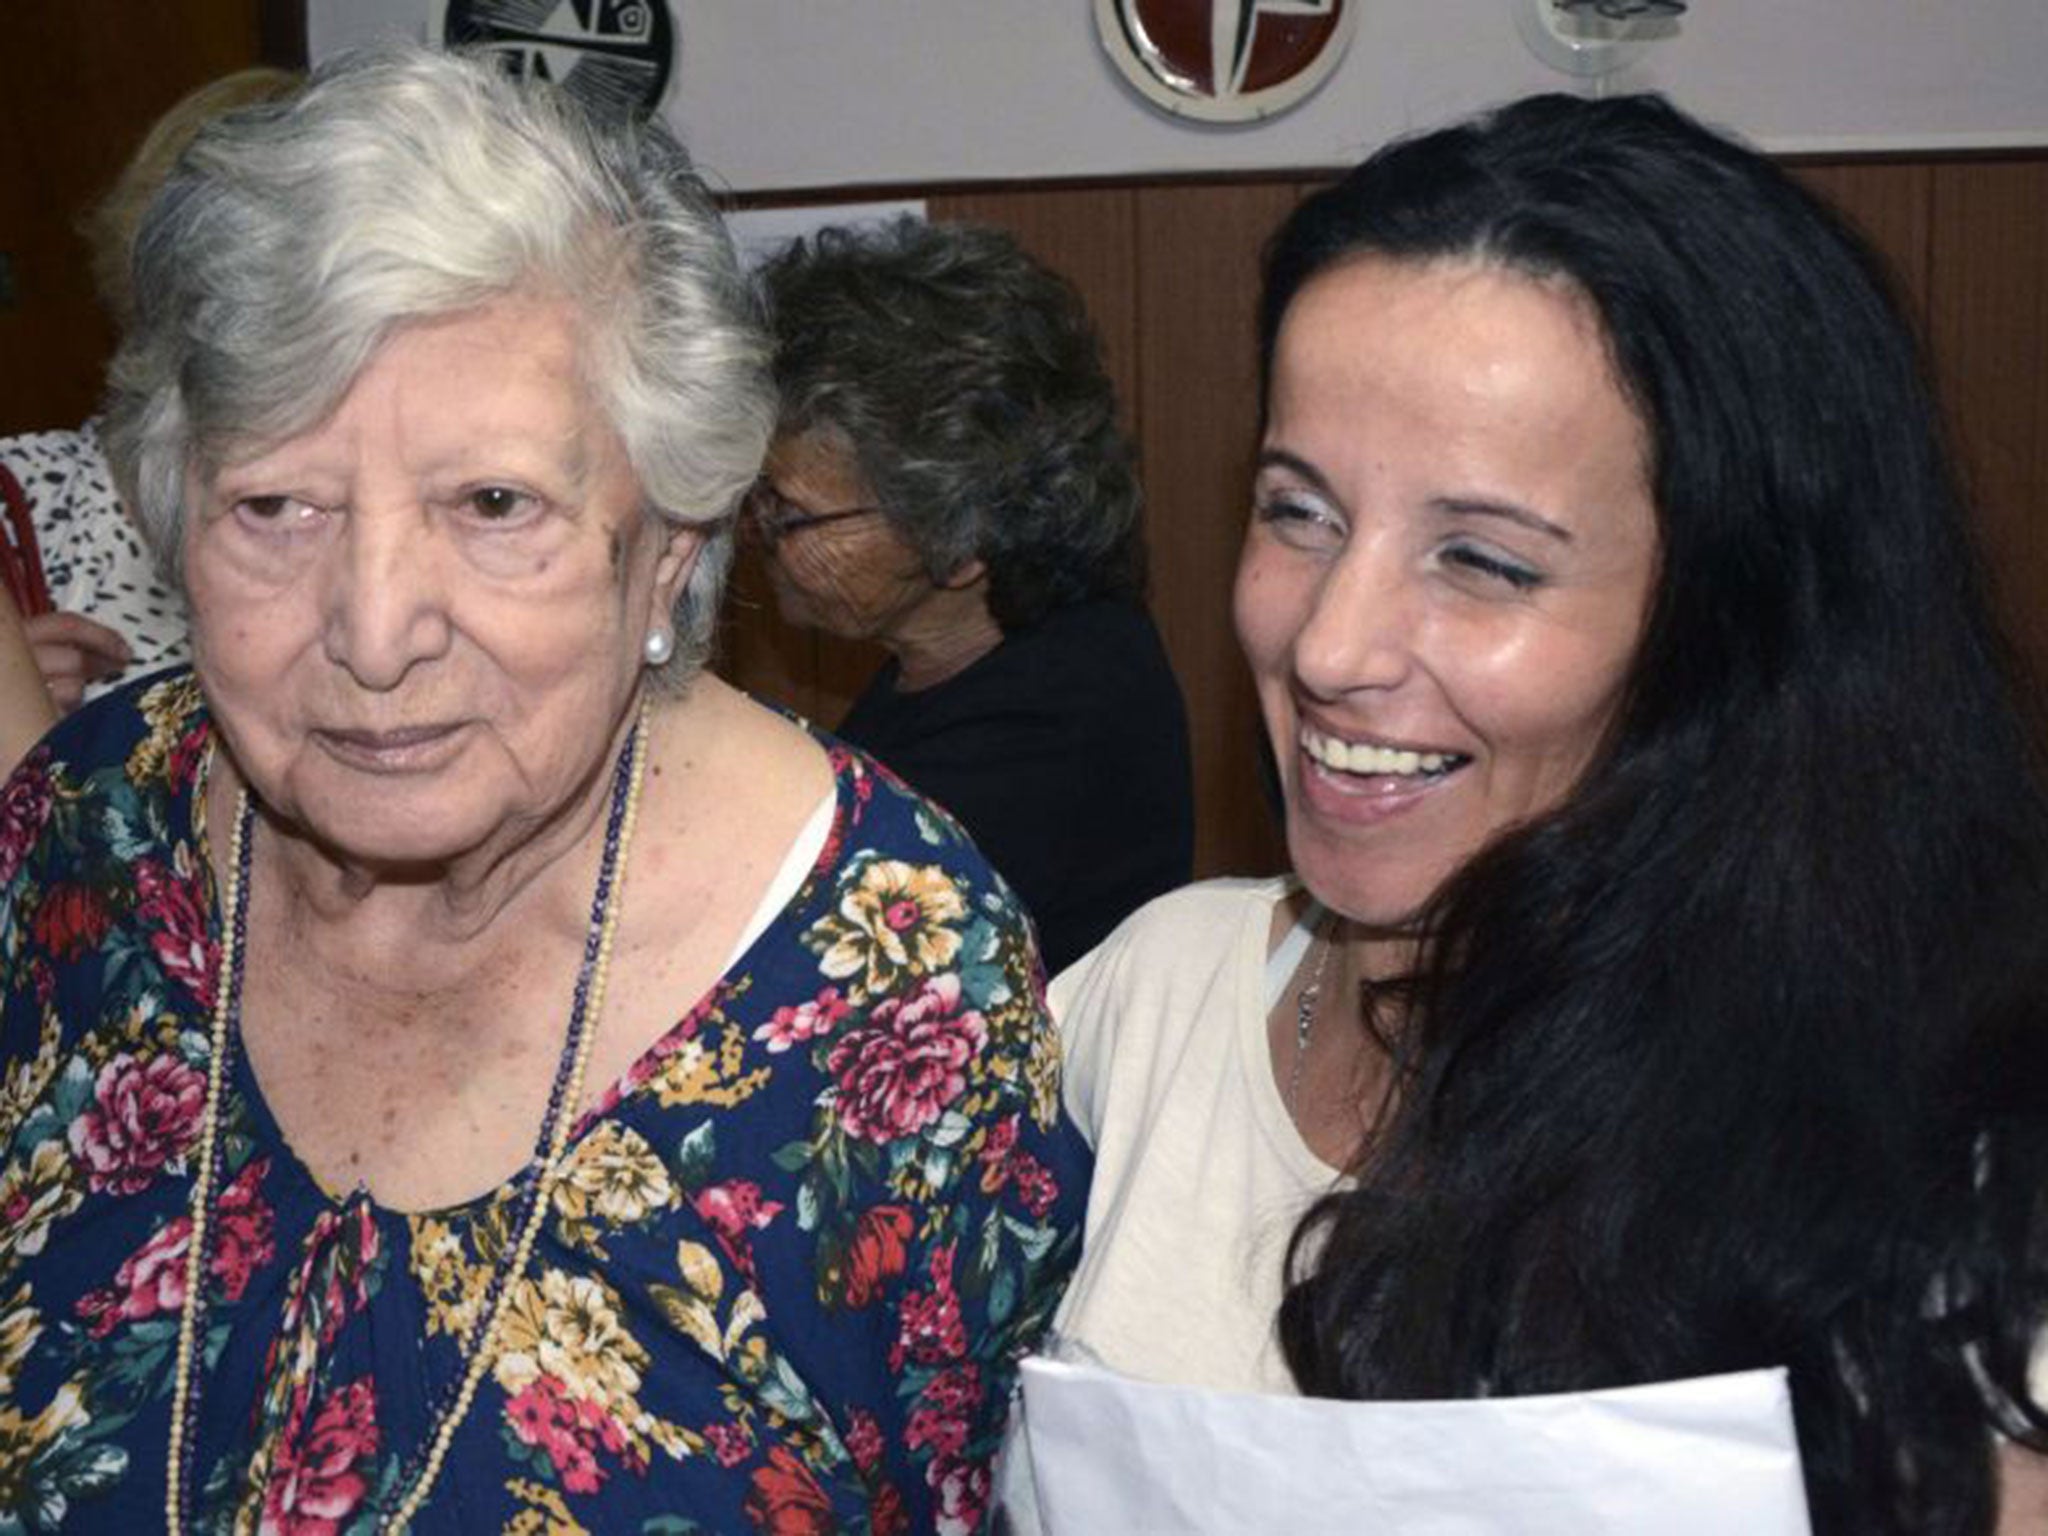 Maria Isabel Mariani thought she had finally met her granddaughter